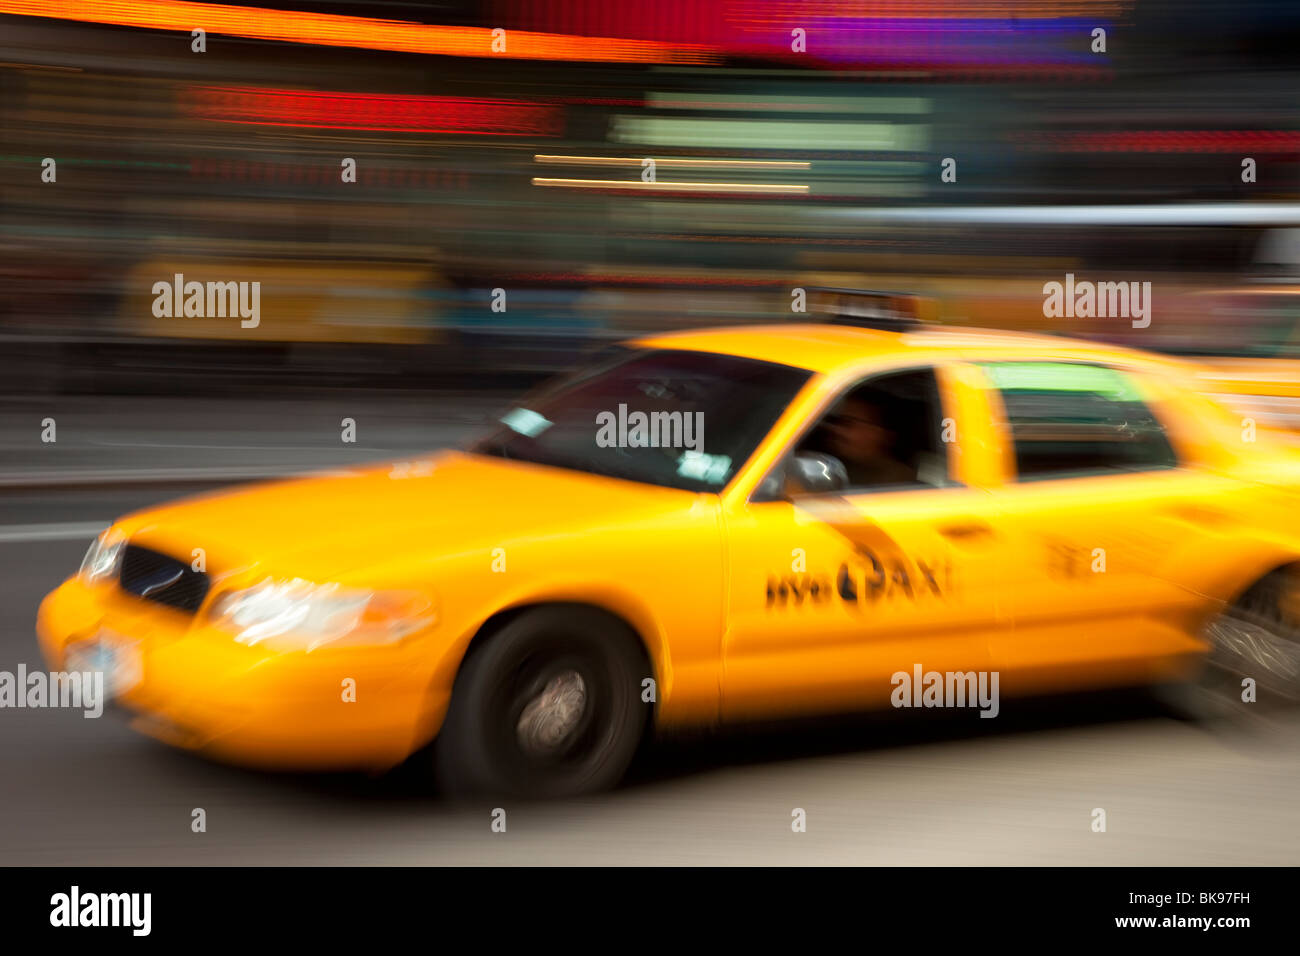 Taxi Taxi am Broadway at Times Square in Manhattan, New York City, USA Stockfoto